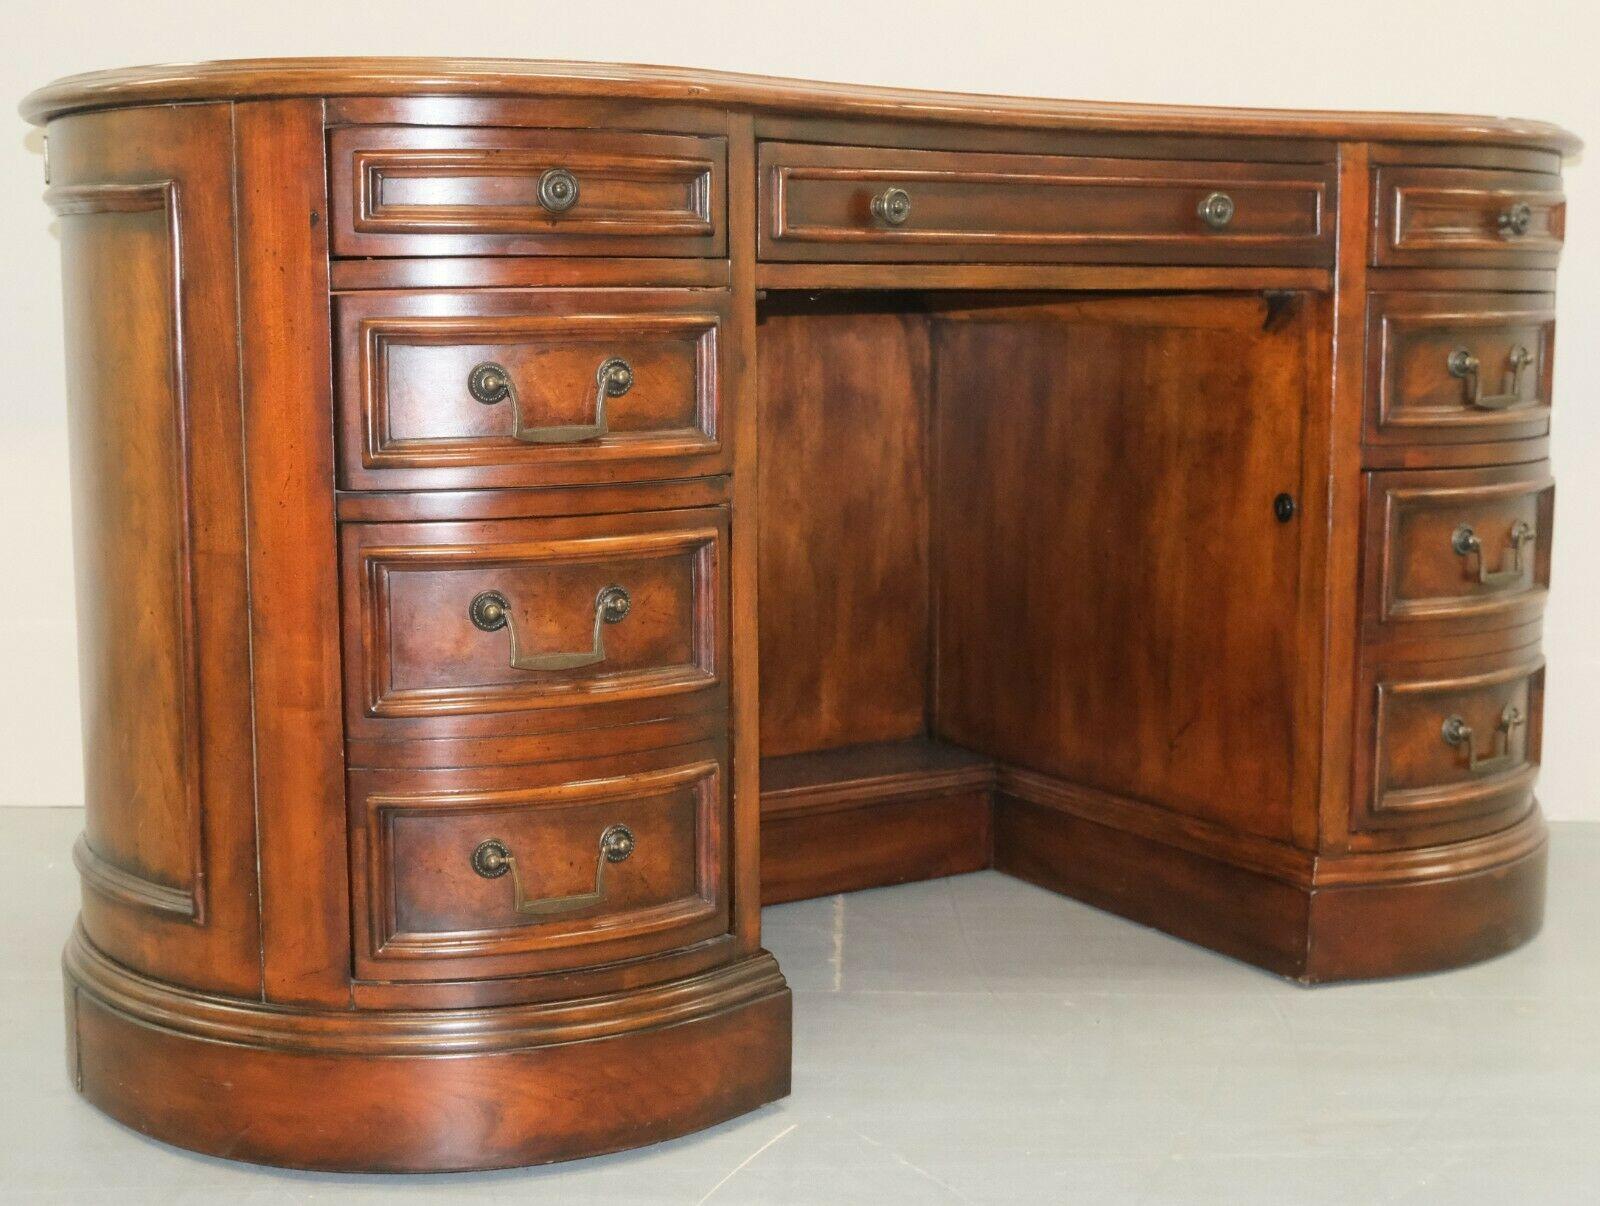 We are delighted to offer for sale this gorgeous Vintage Hardwood brown kidney desk with seven drawers.

The look of the desk is simply lovely, being able to add style to any room. The item will work for a PC as it does have some space cut where